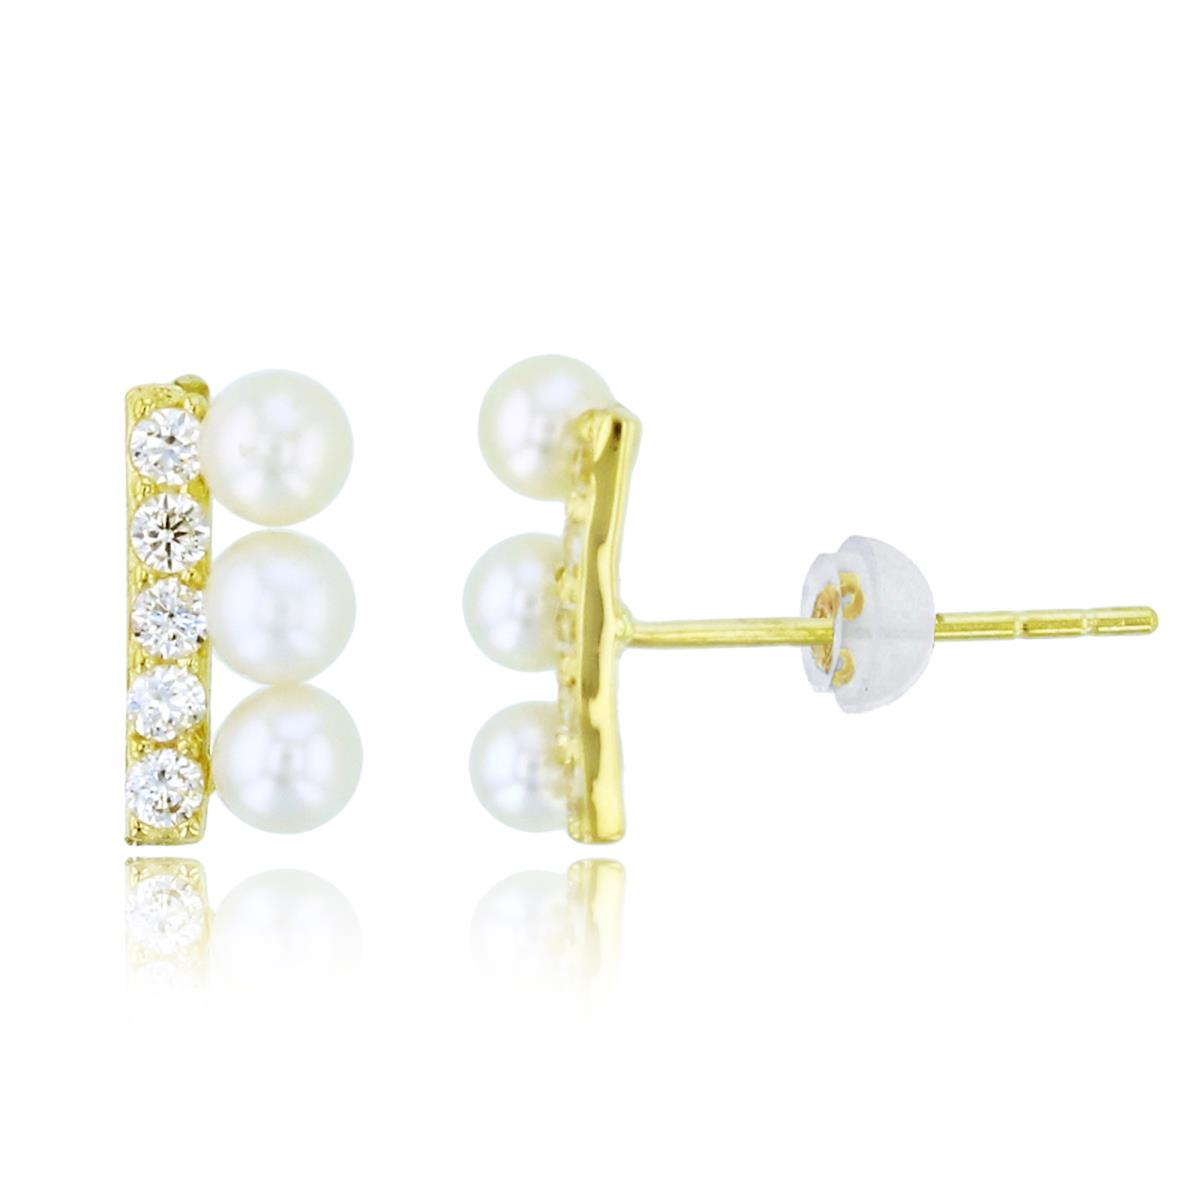 14K Yellow Gold 3.5mm Rnd Pearls & Rnd White CZ Row Studs with Silicon Backs